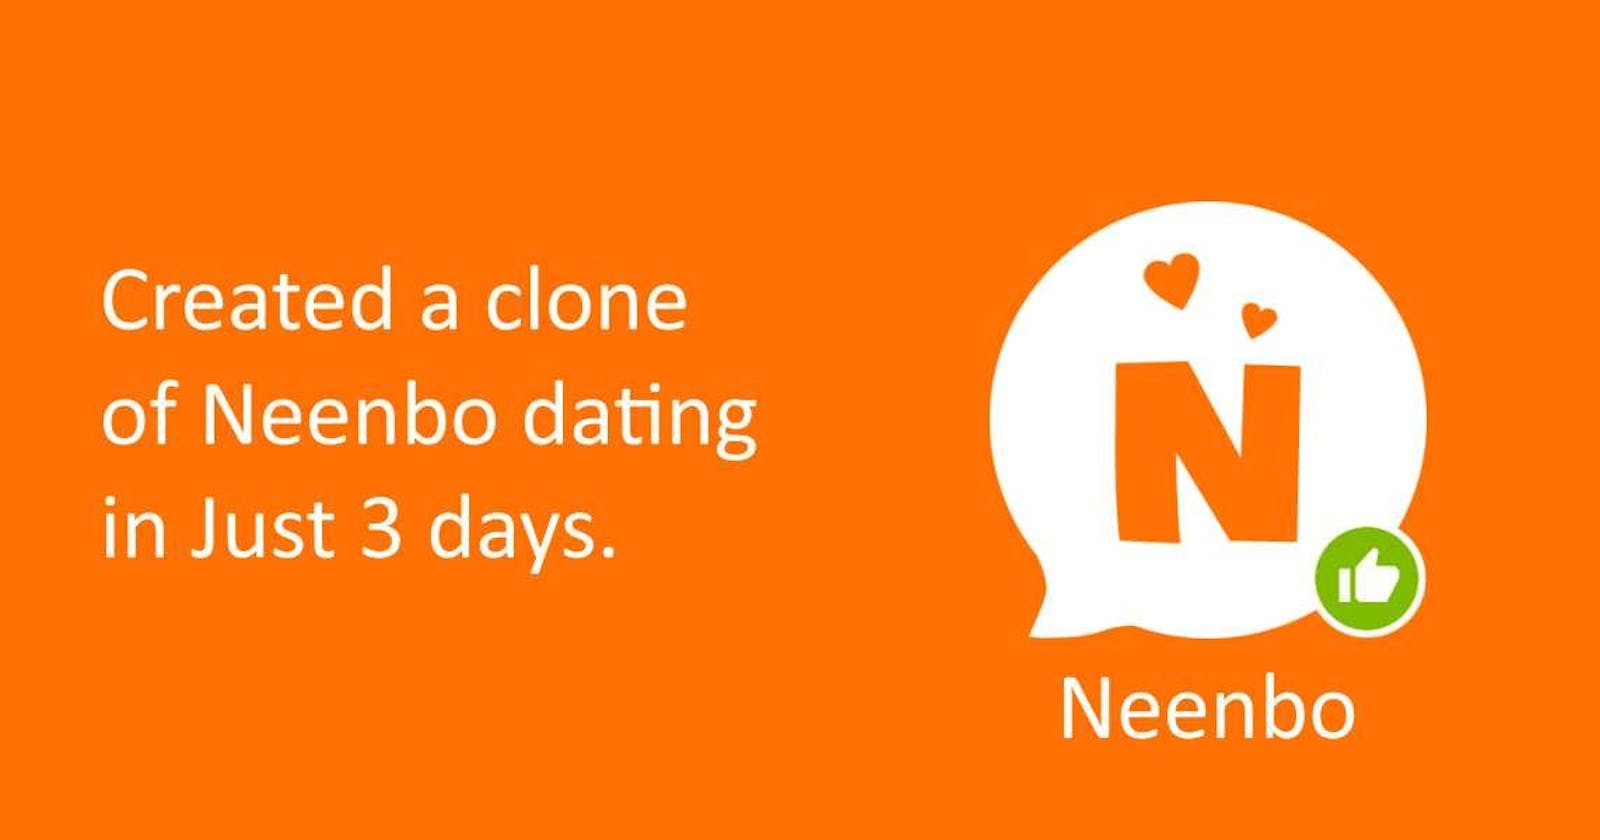 Created a clone of Neenbo dating app in just  3 days - Masai School Project